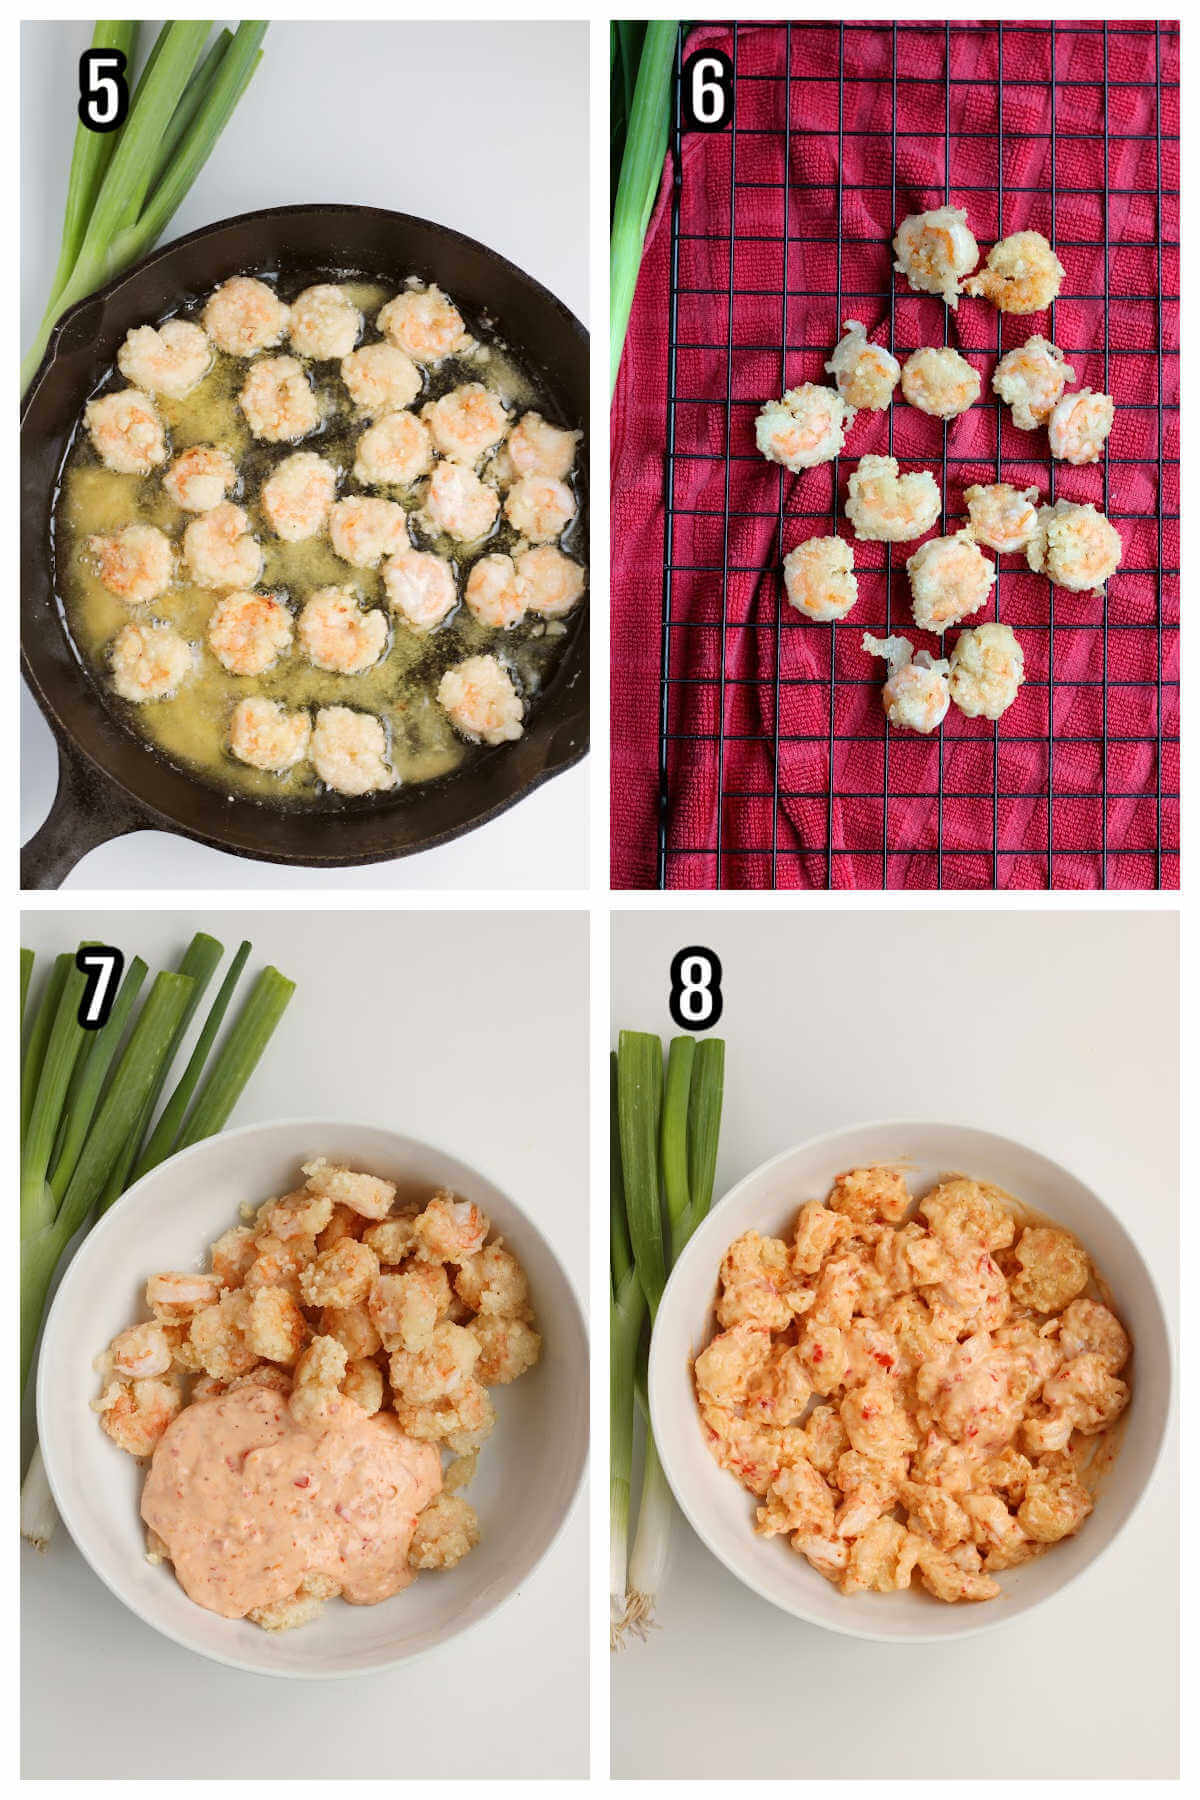 Second set of four and final steps to making the bang bang shrimp. 